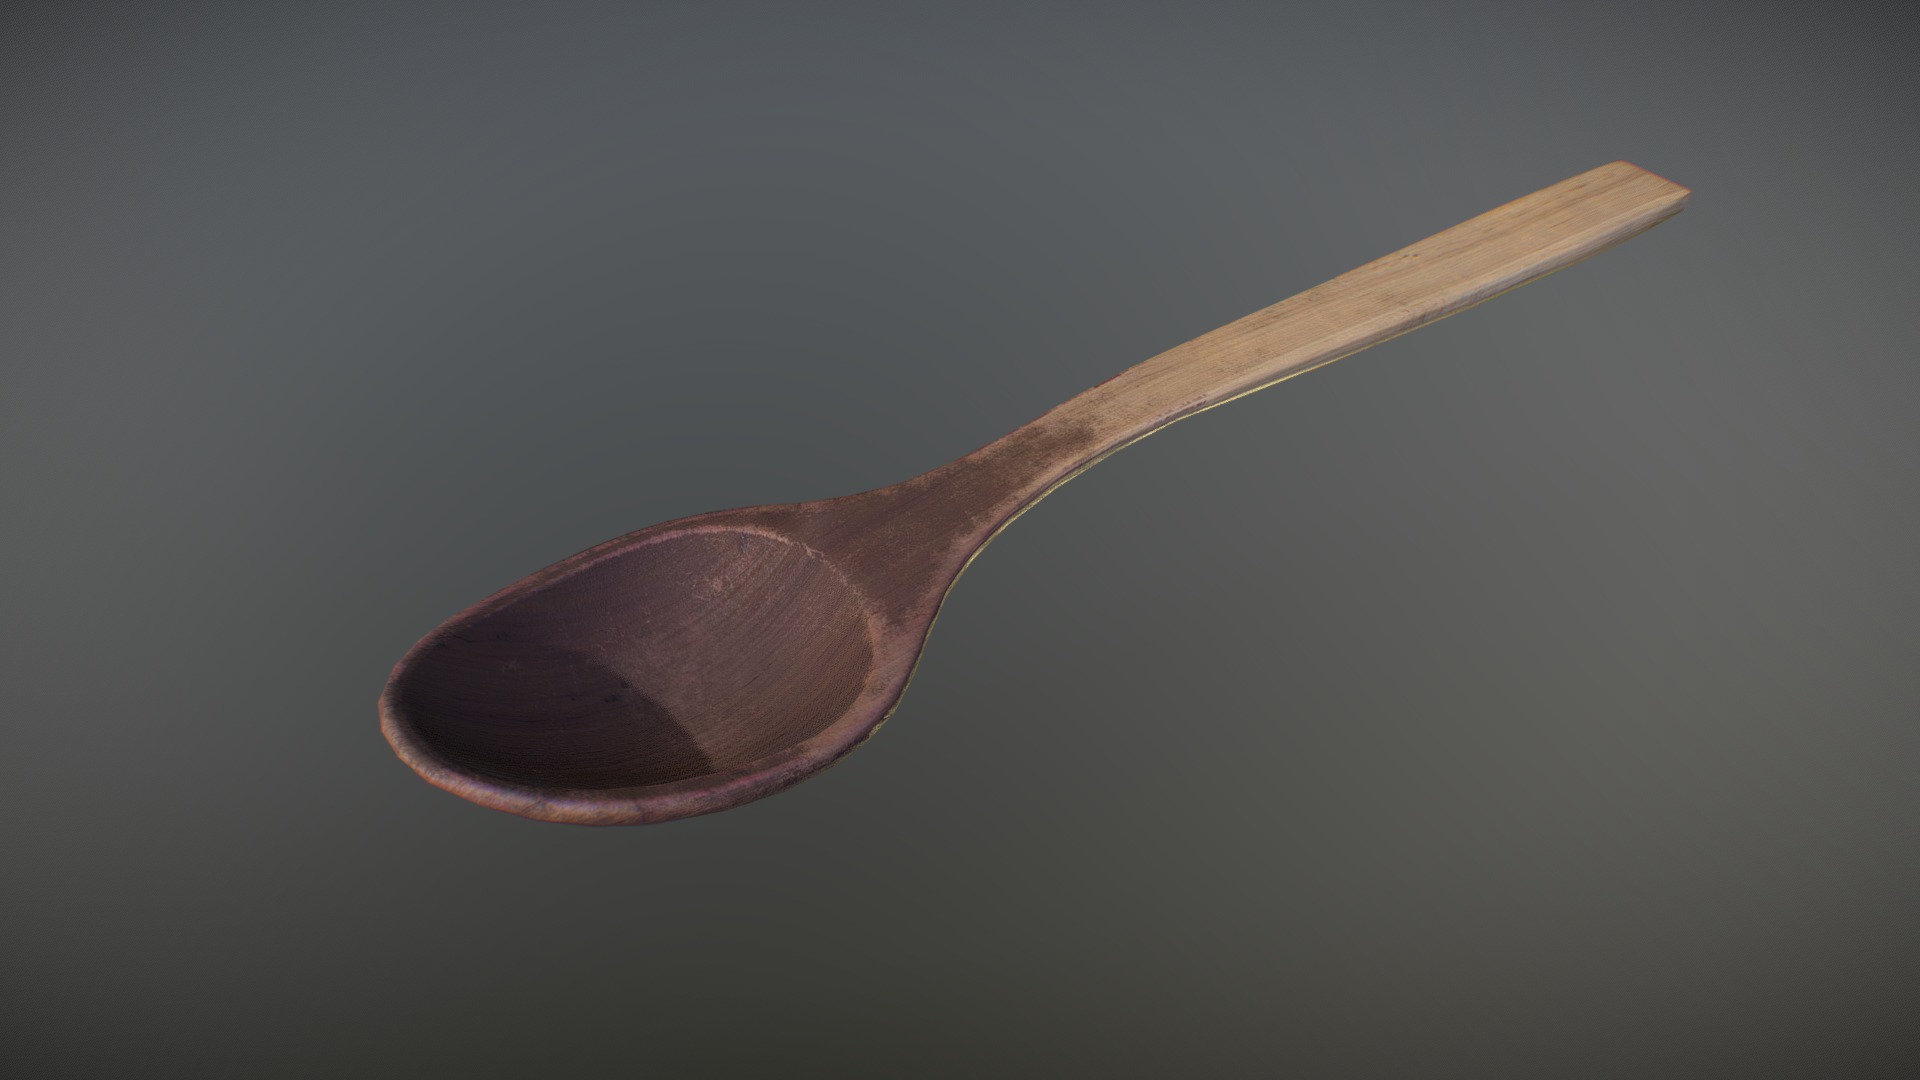 3D model Spoon - This is a 3D model of the Spoon. The 3D model is about a wooden spoon on a grey background.